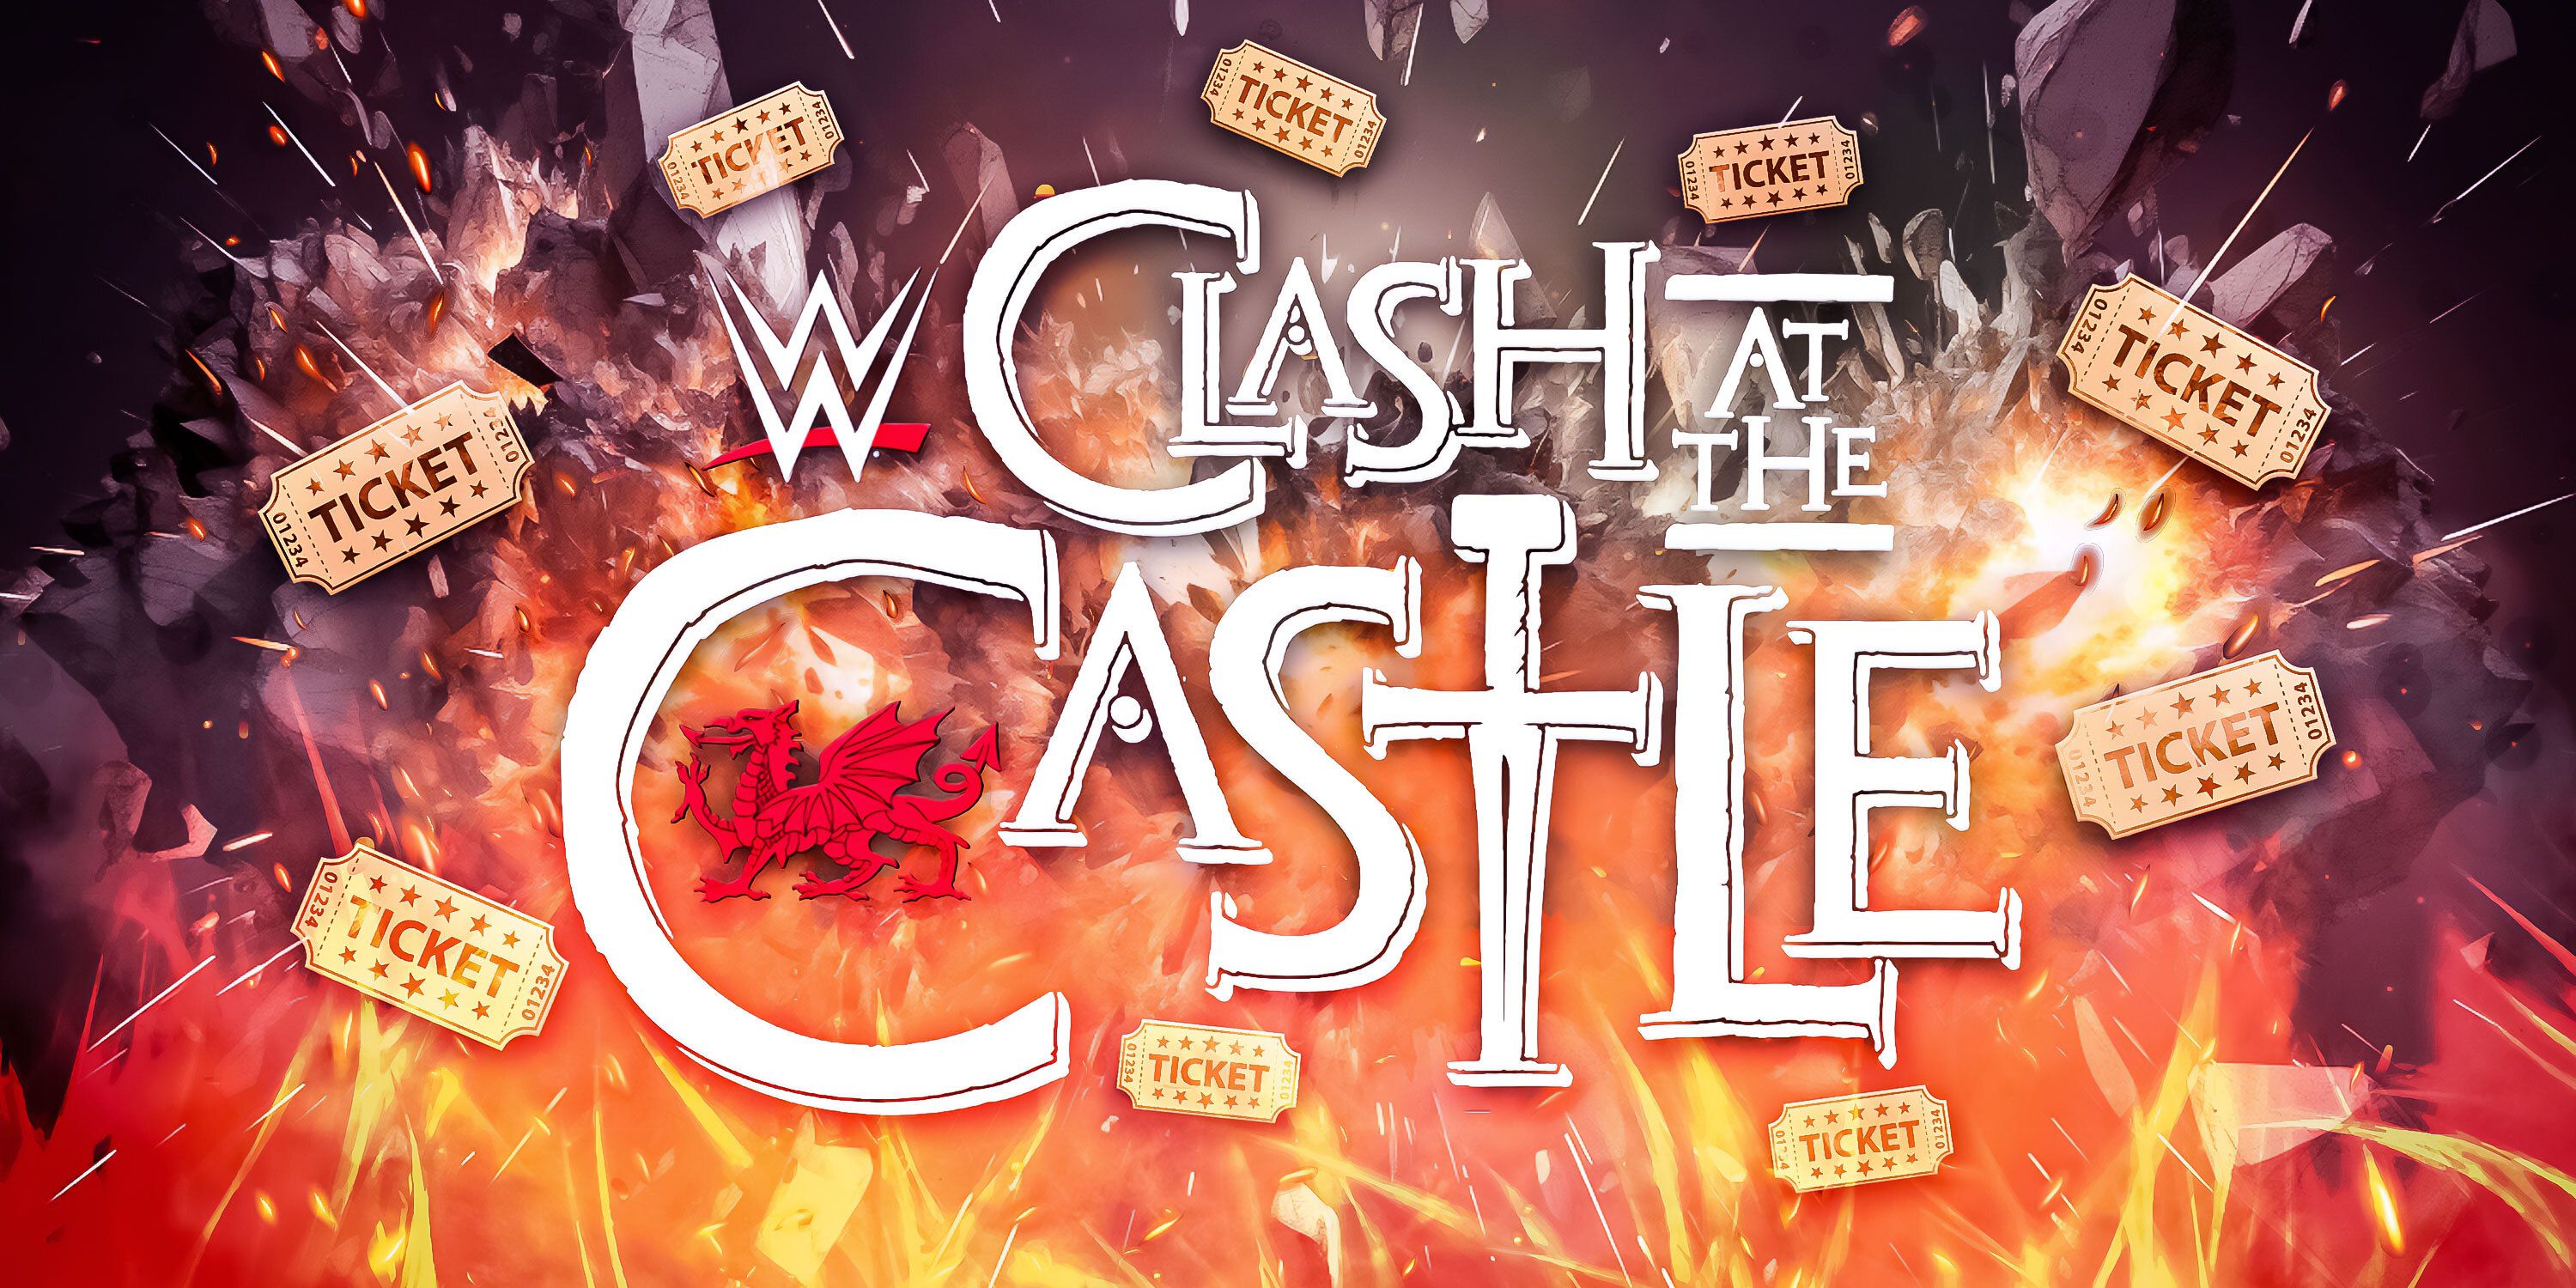 Clash At The Castle ticket prices